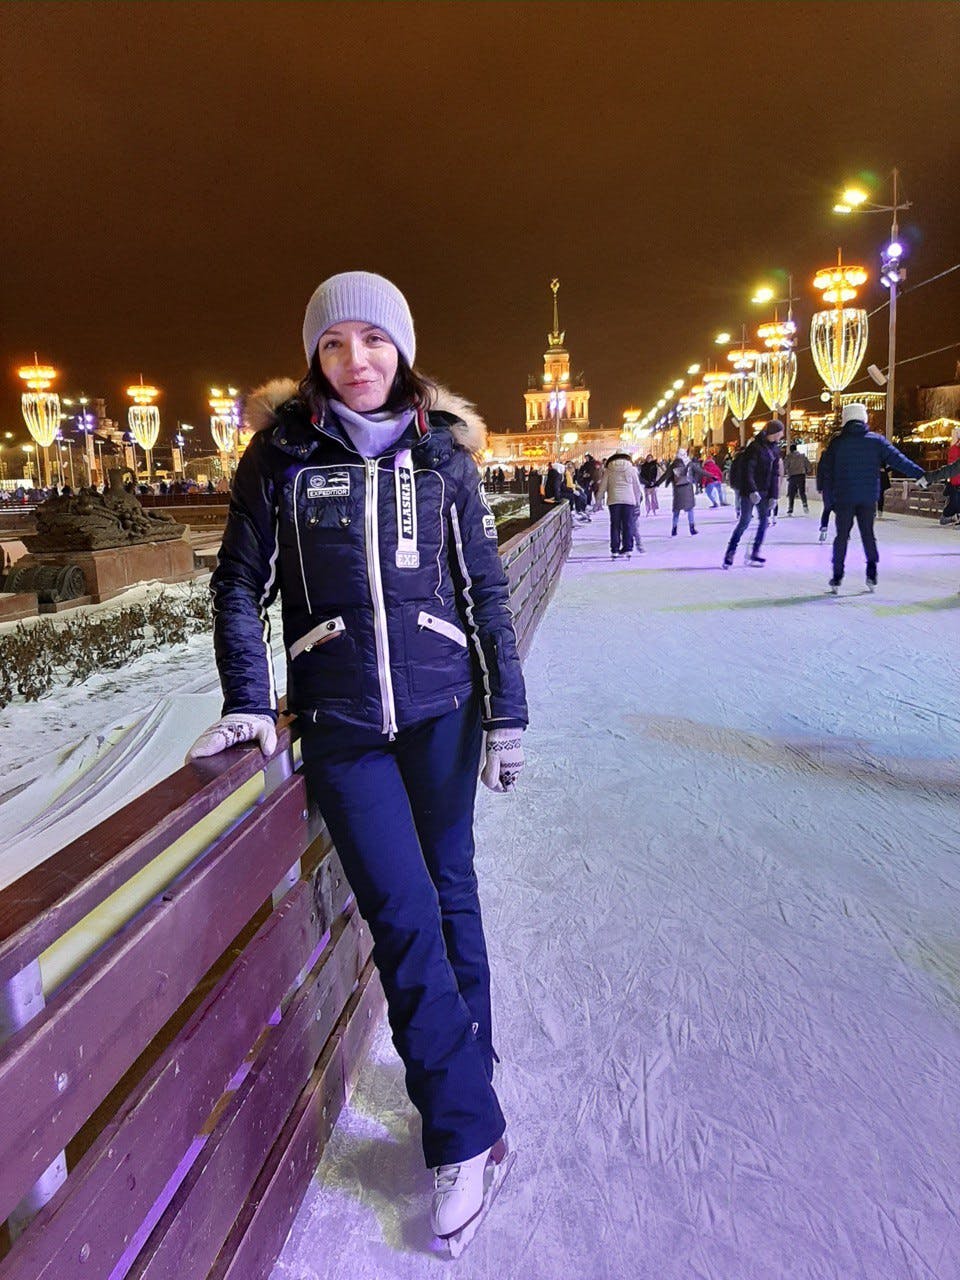 The woman is doing ice-skating 